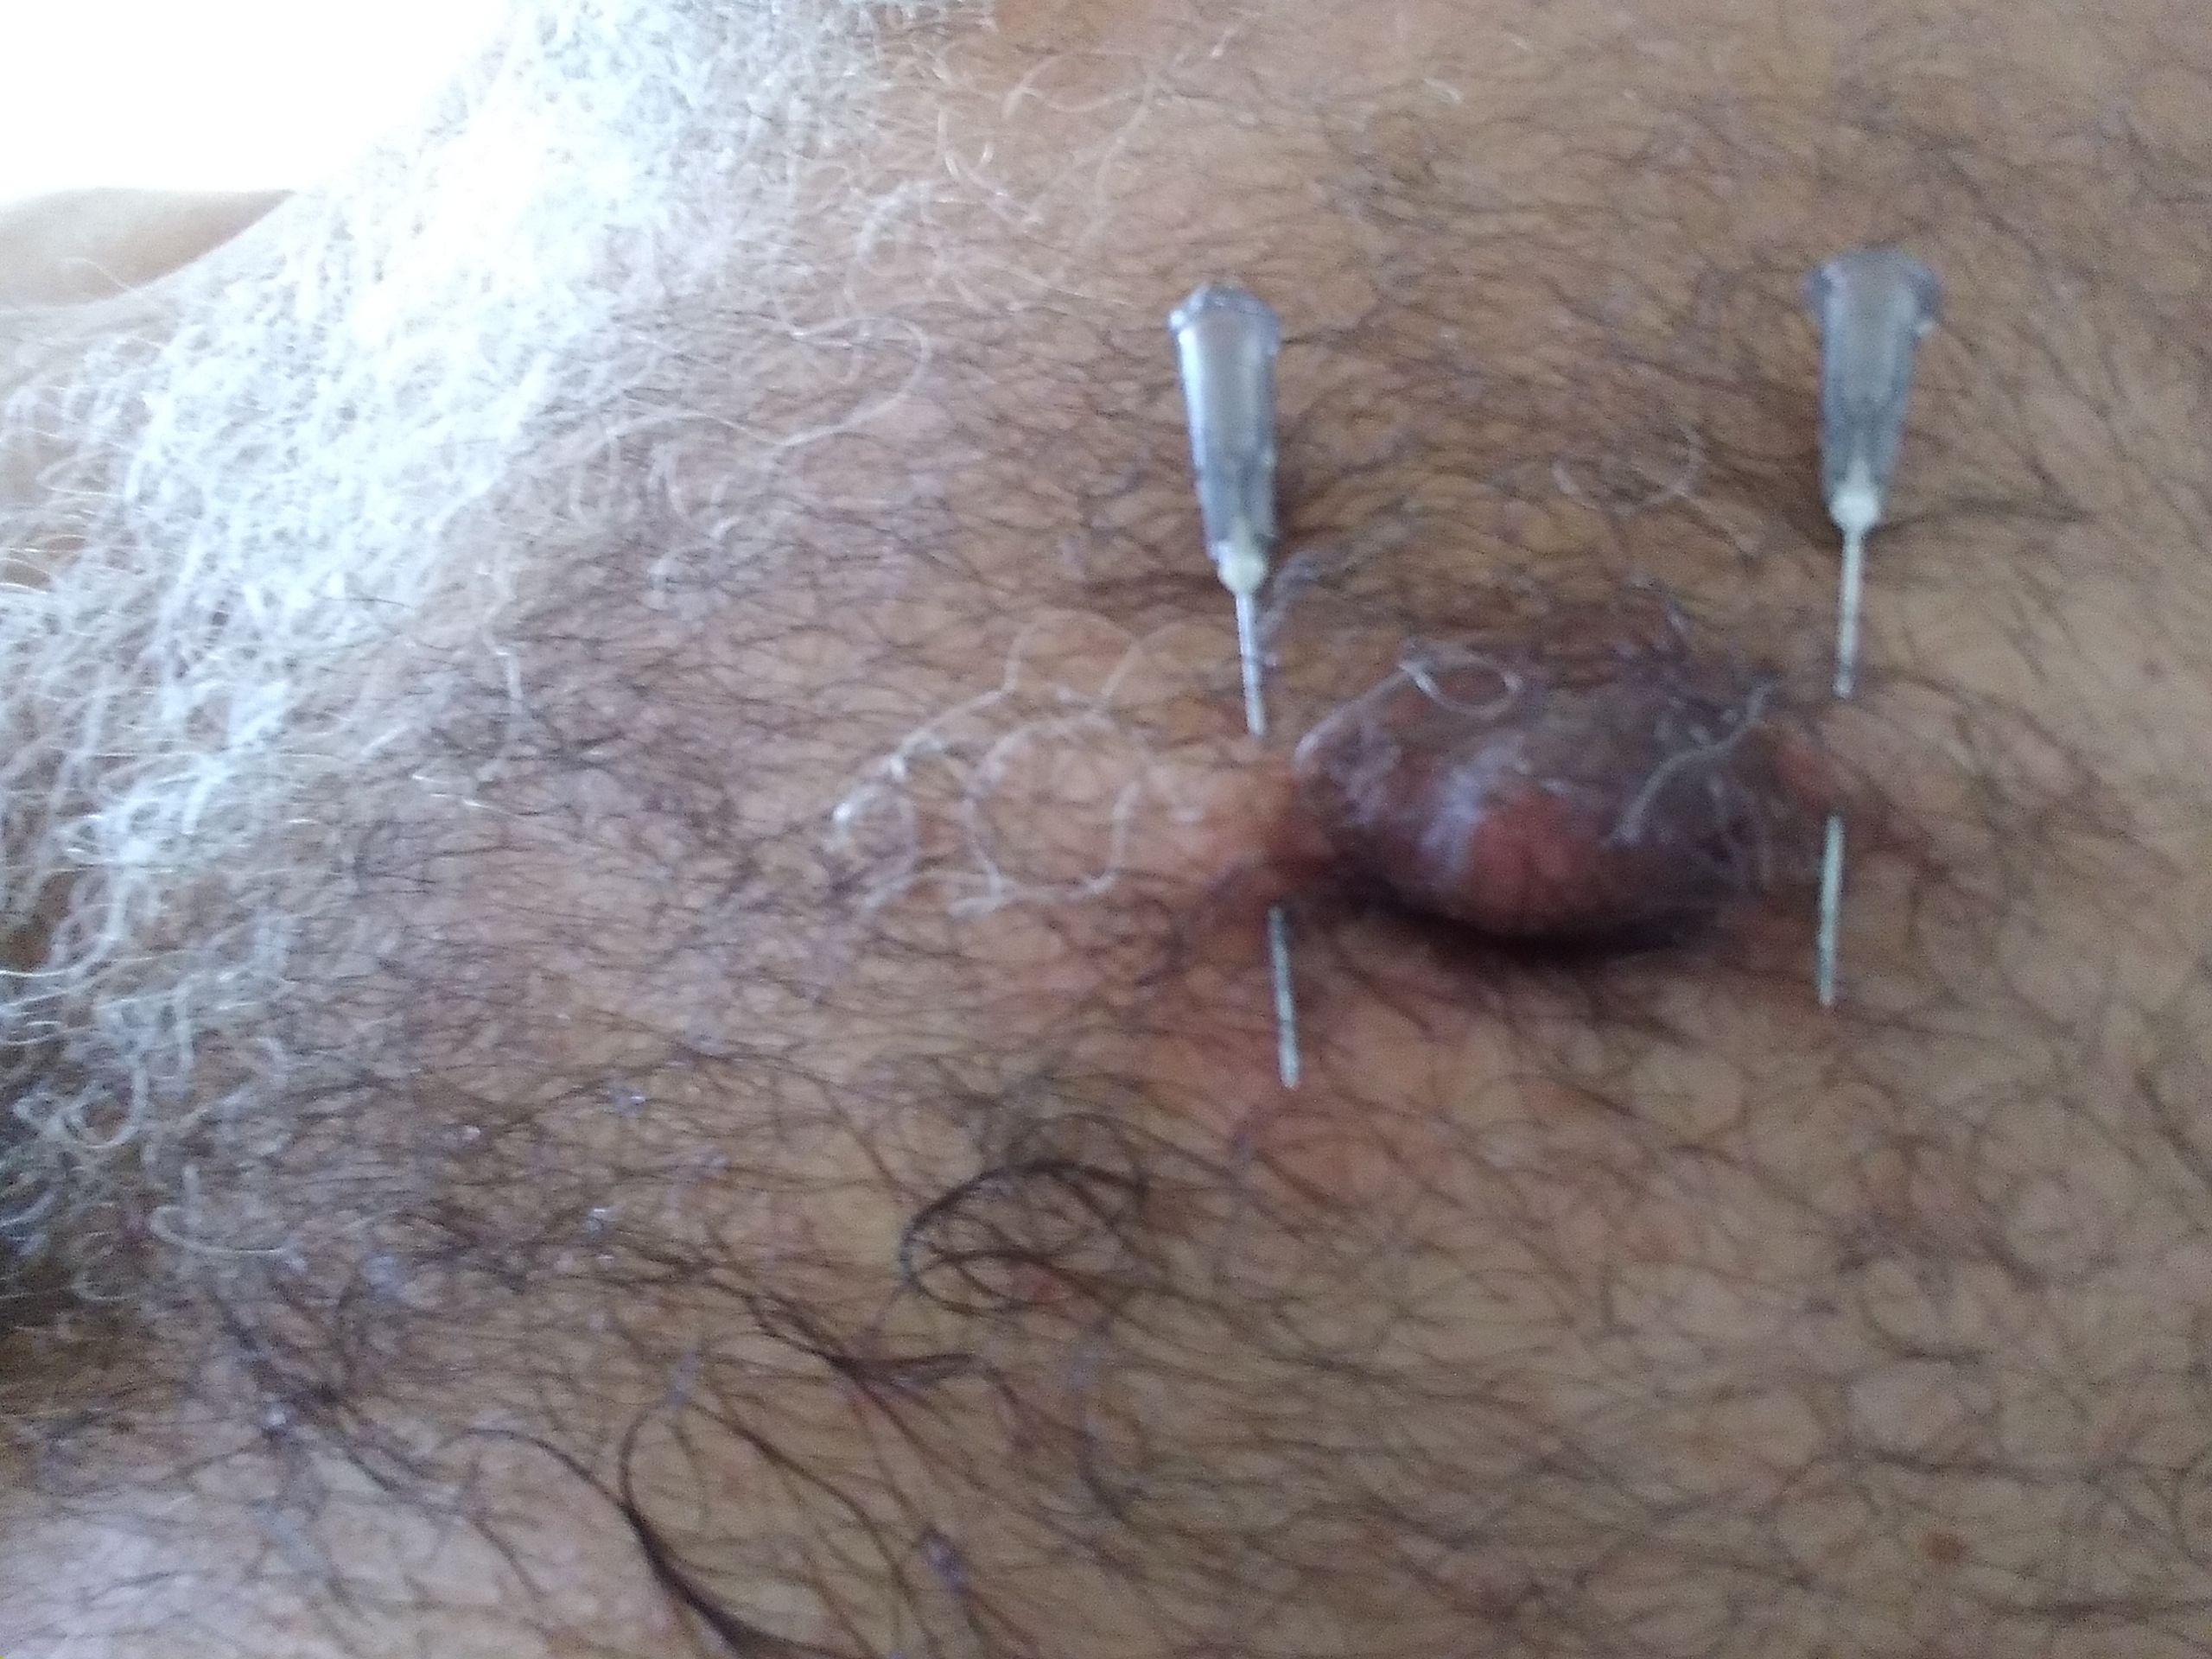 Needles in other nipple too